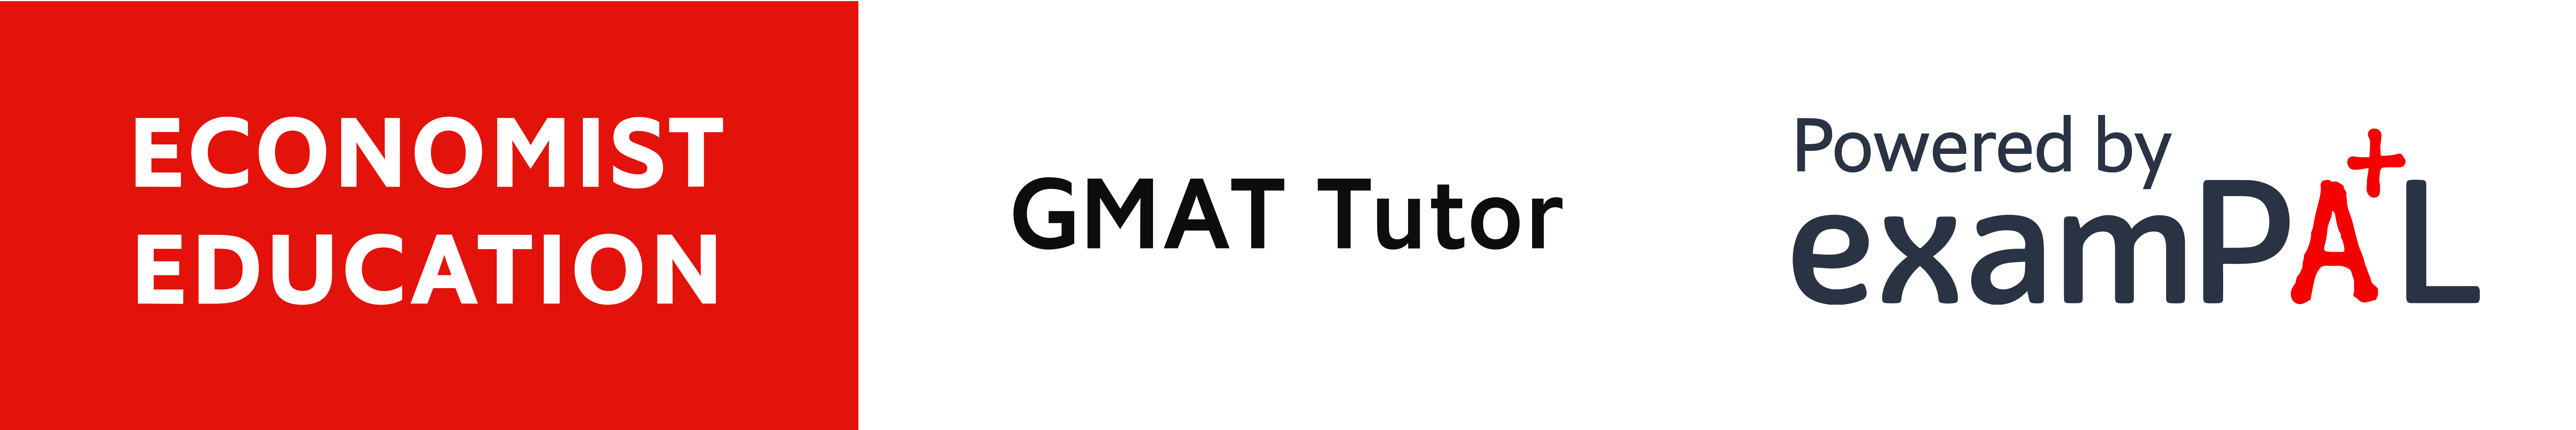 Sign Up And Get Special Offer At Economist GMAT Tutor